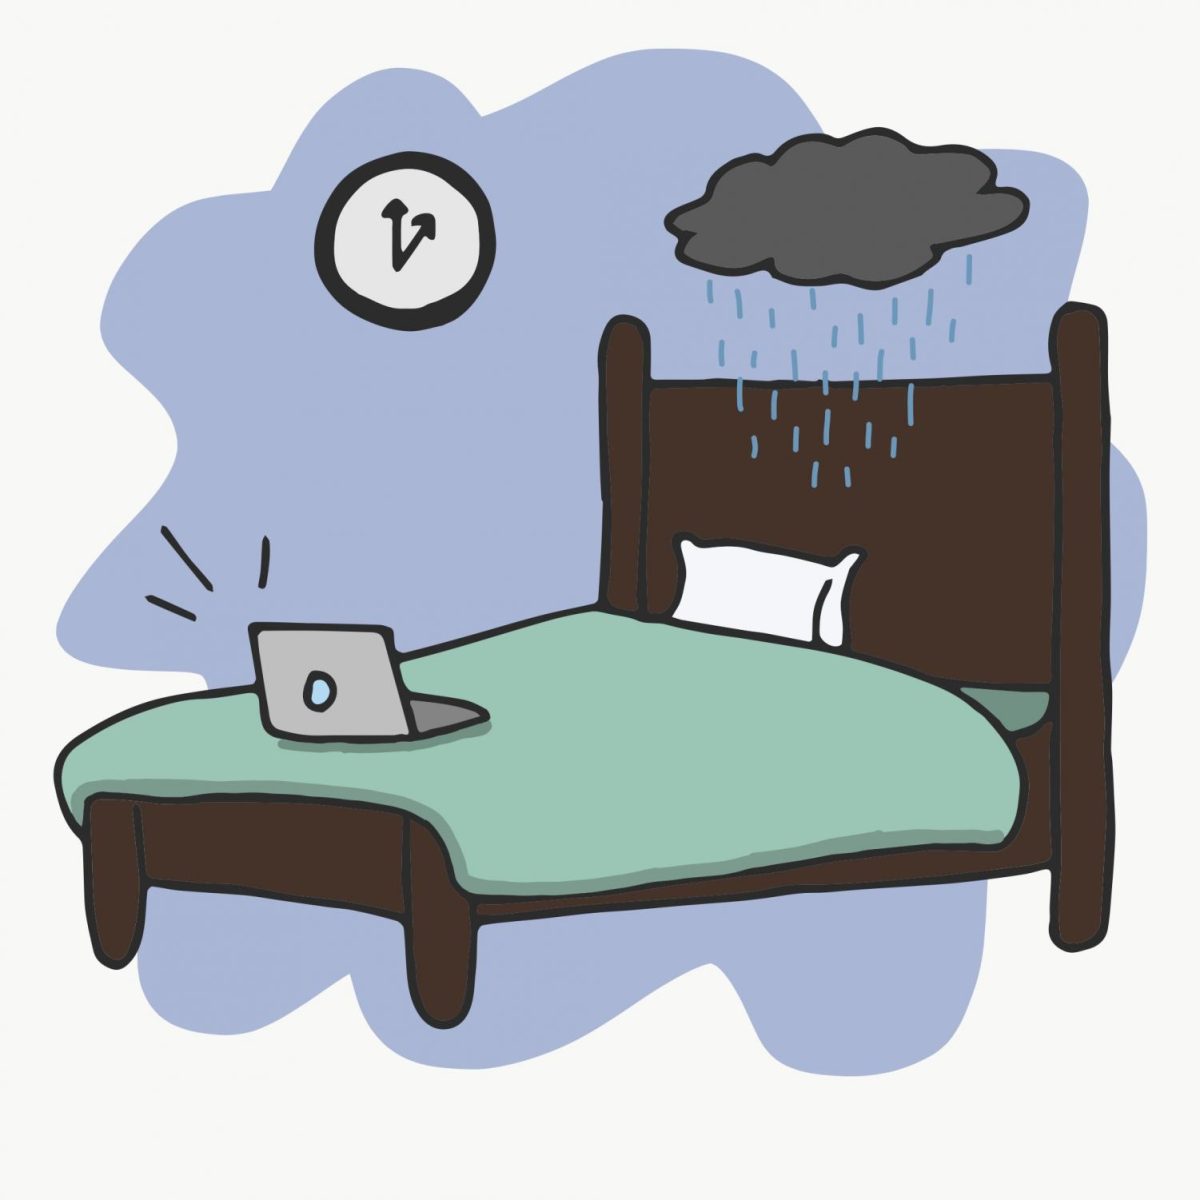 An+illustration+of+an+empty+bed+with+a+laptop+on+it+and+a+raincloud+above+the+pillow.